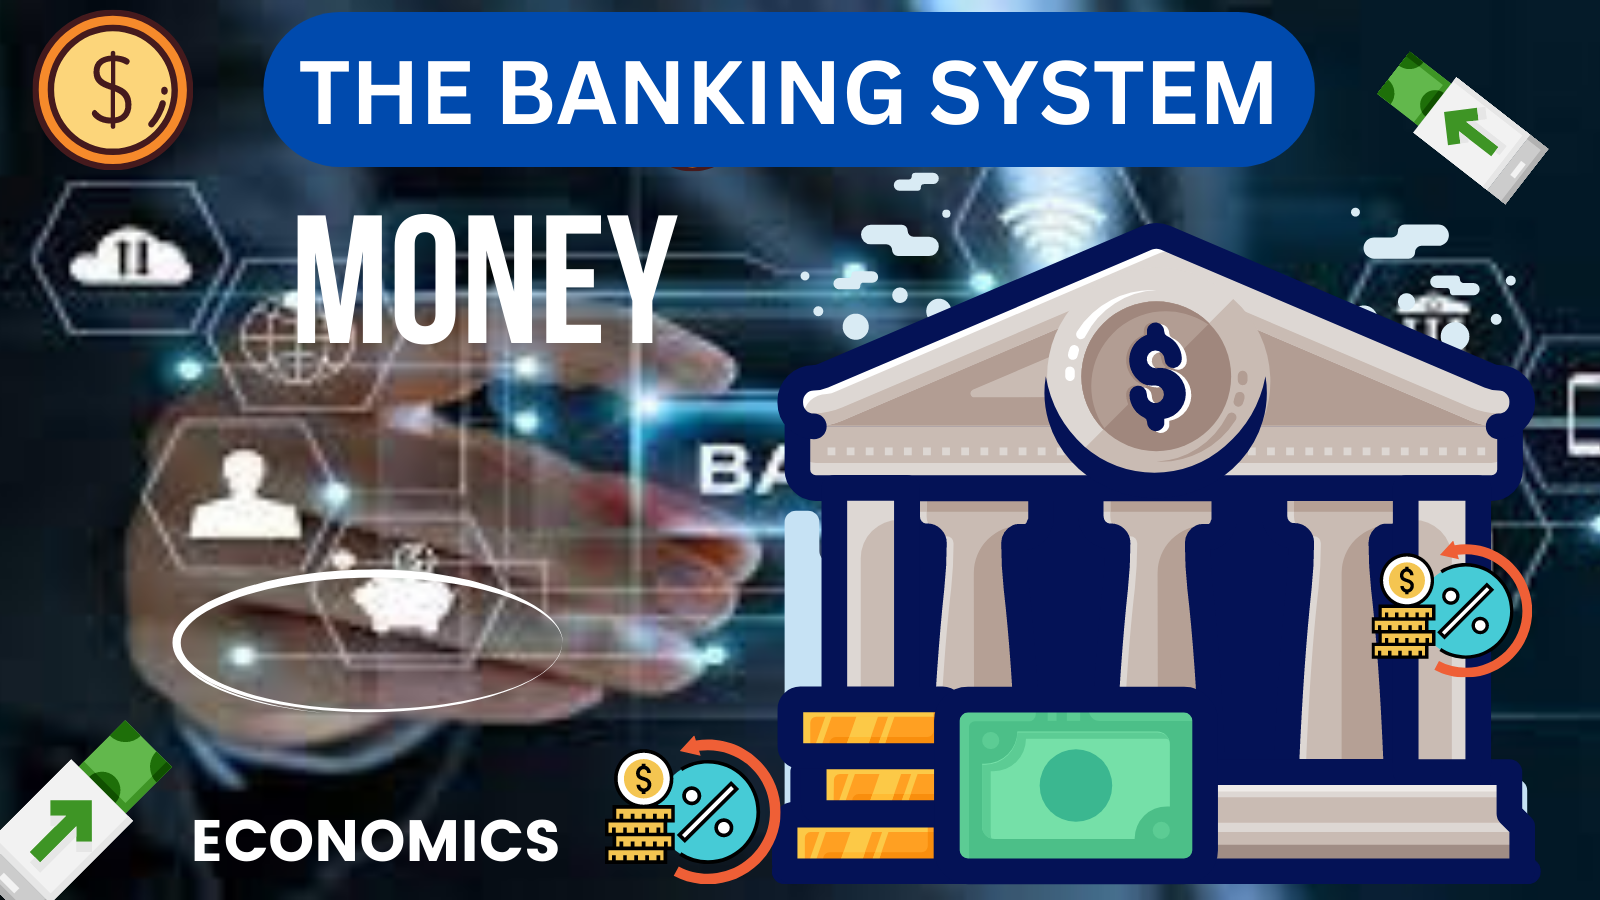 Money and the banking system